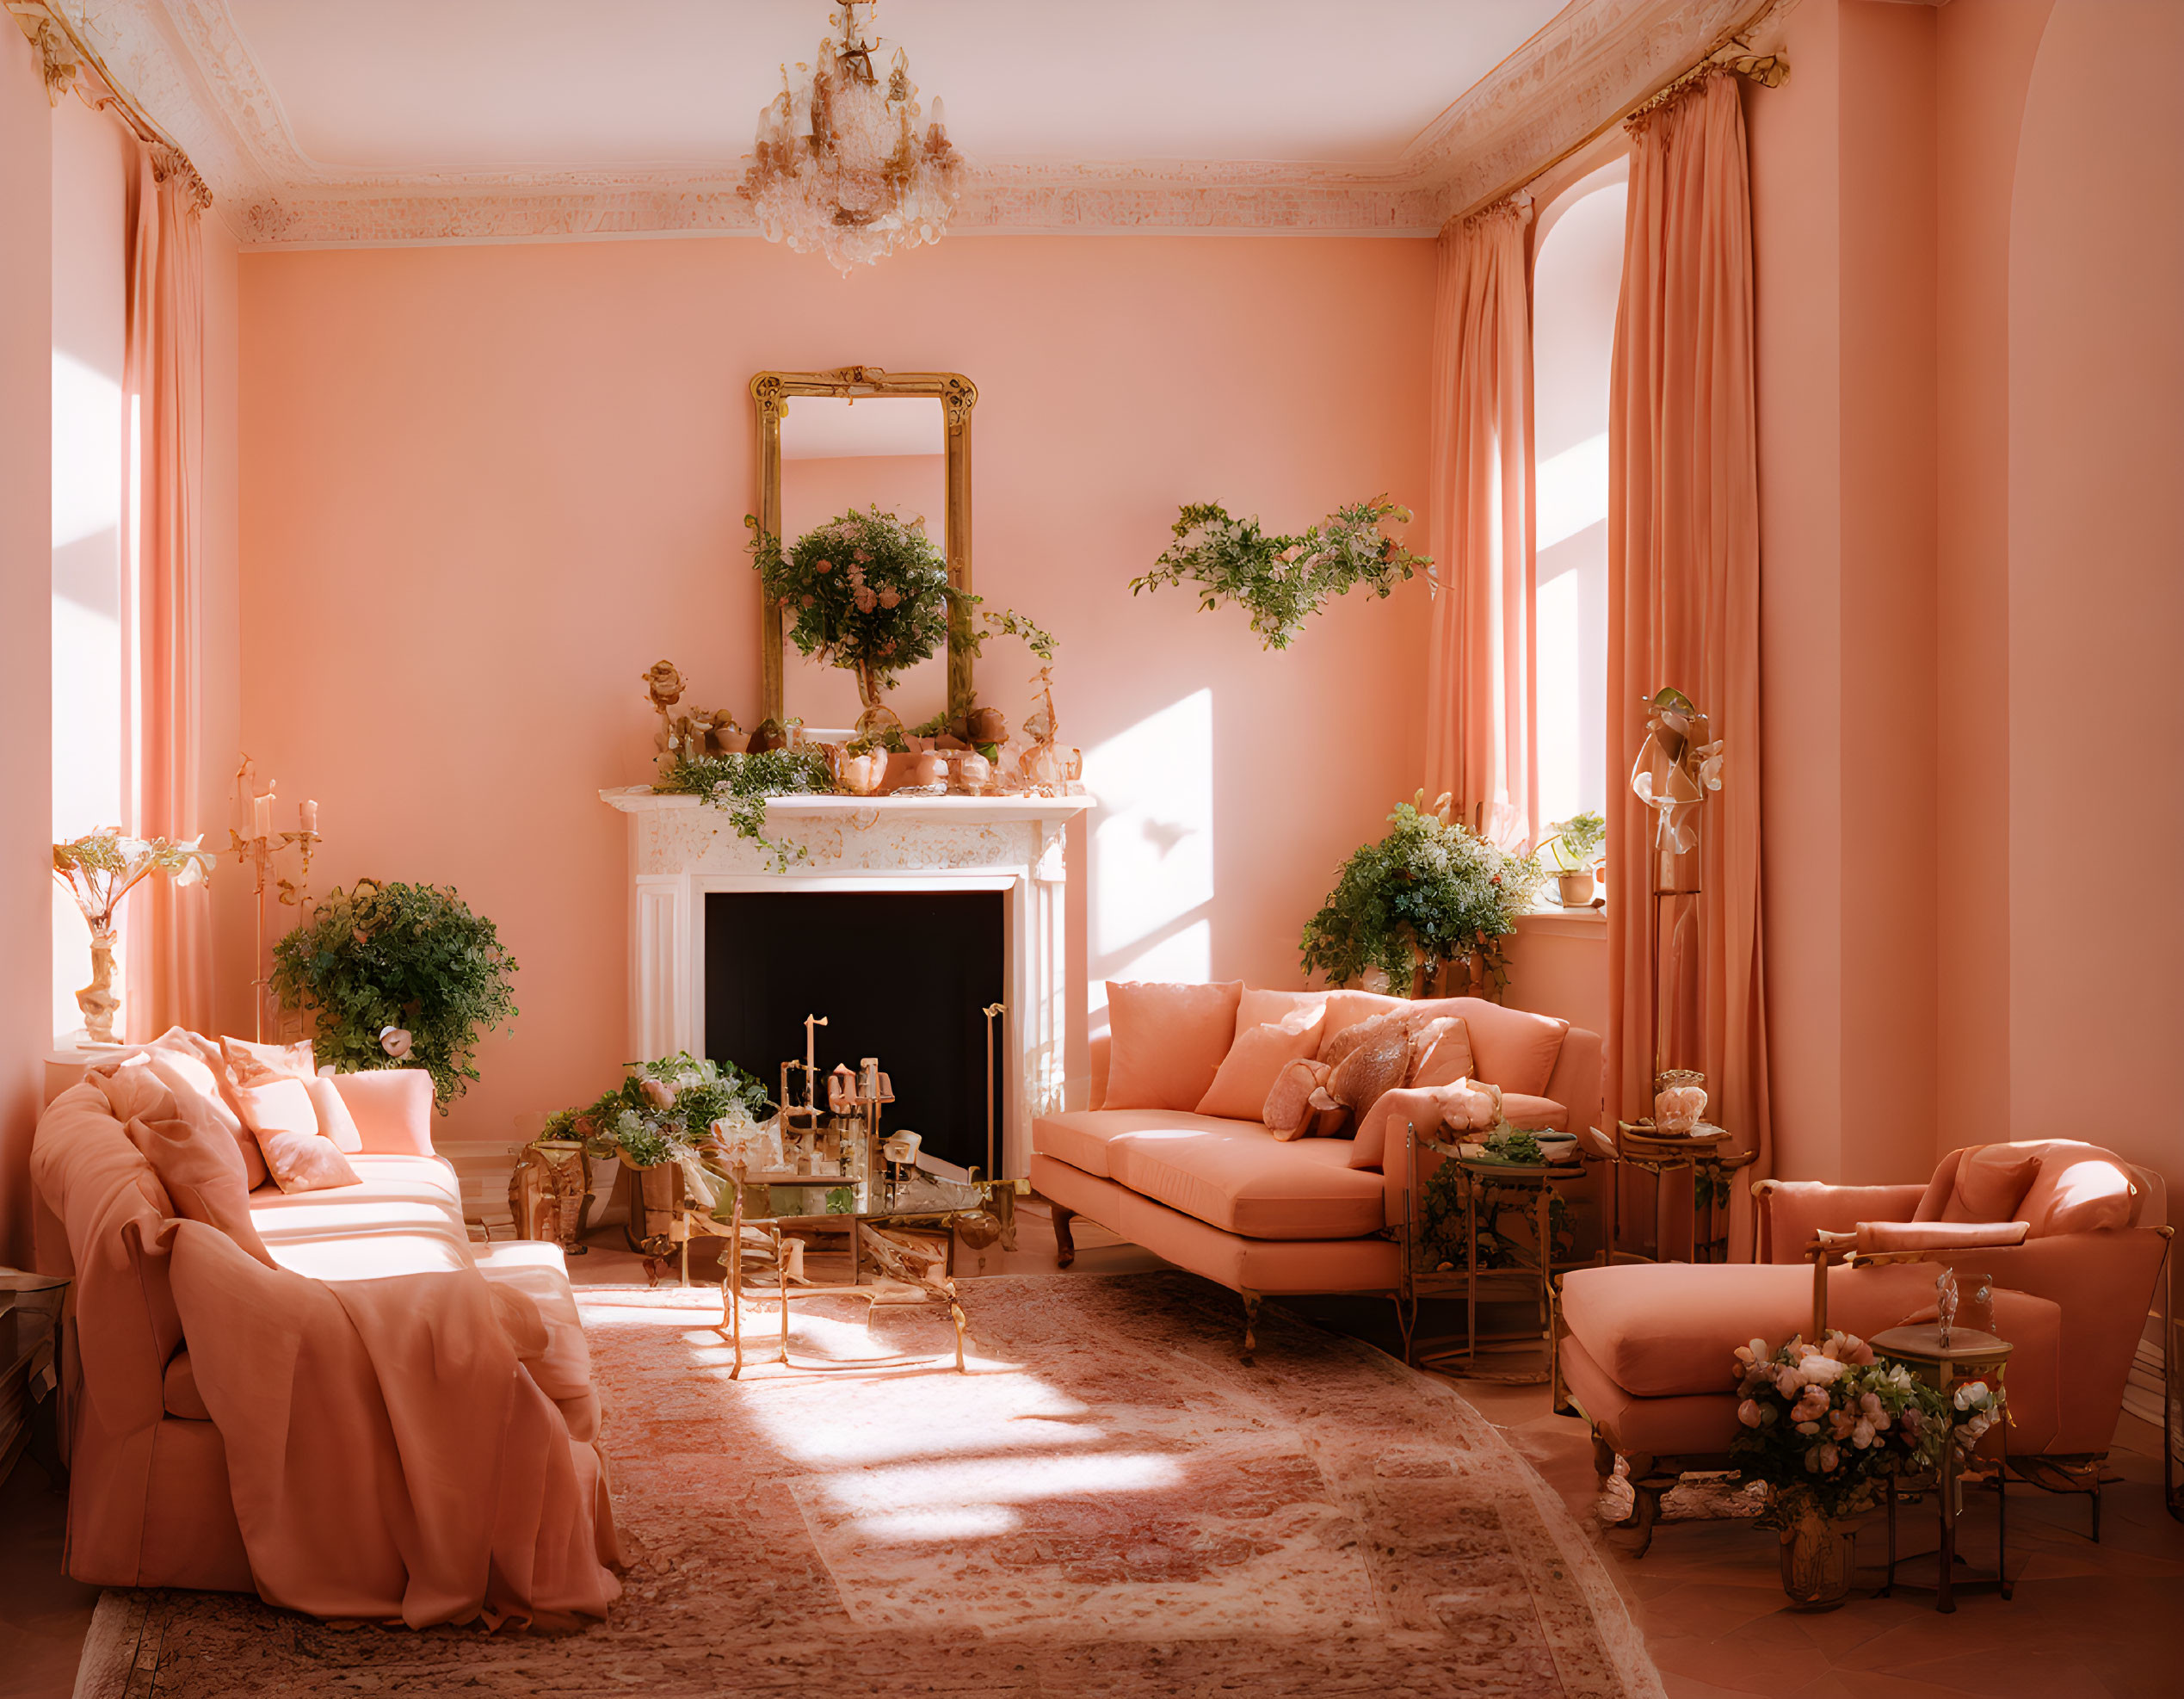 Pink-themed living room with plush sofas, fireplace, plants, gold accents, vintage furniture & chandelier